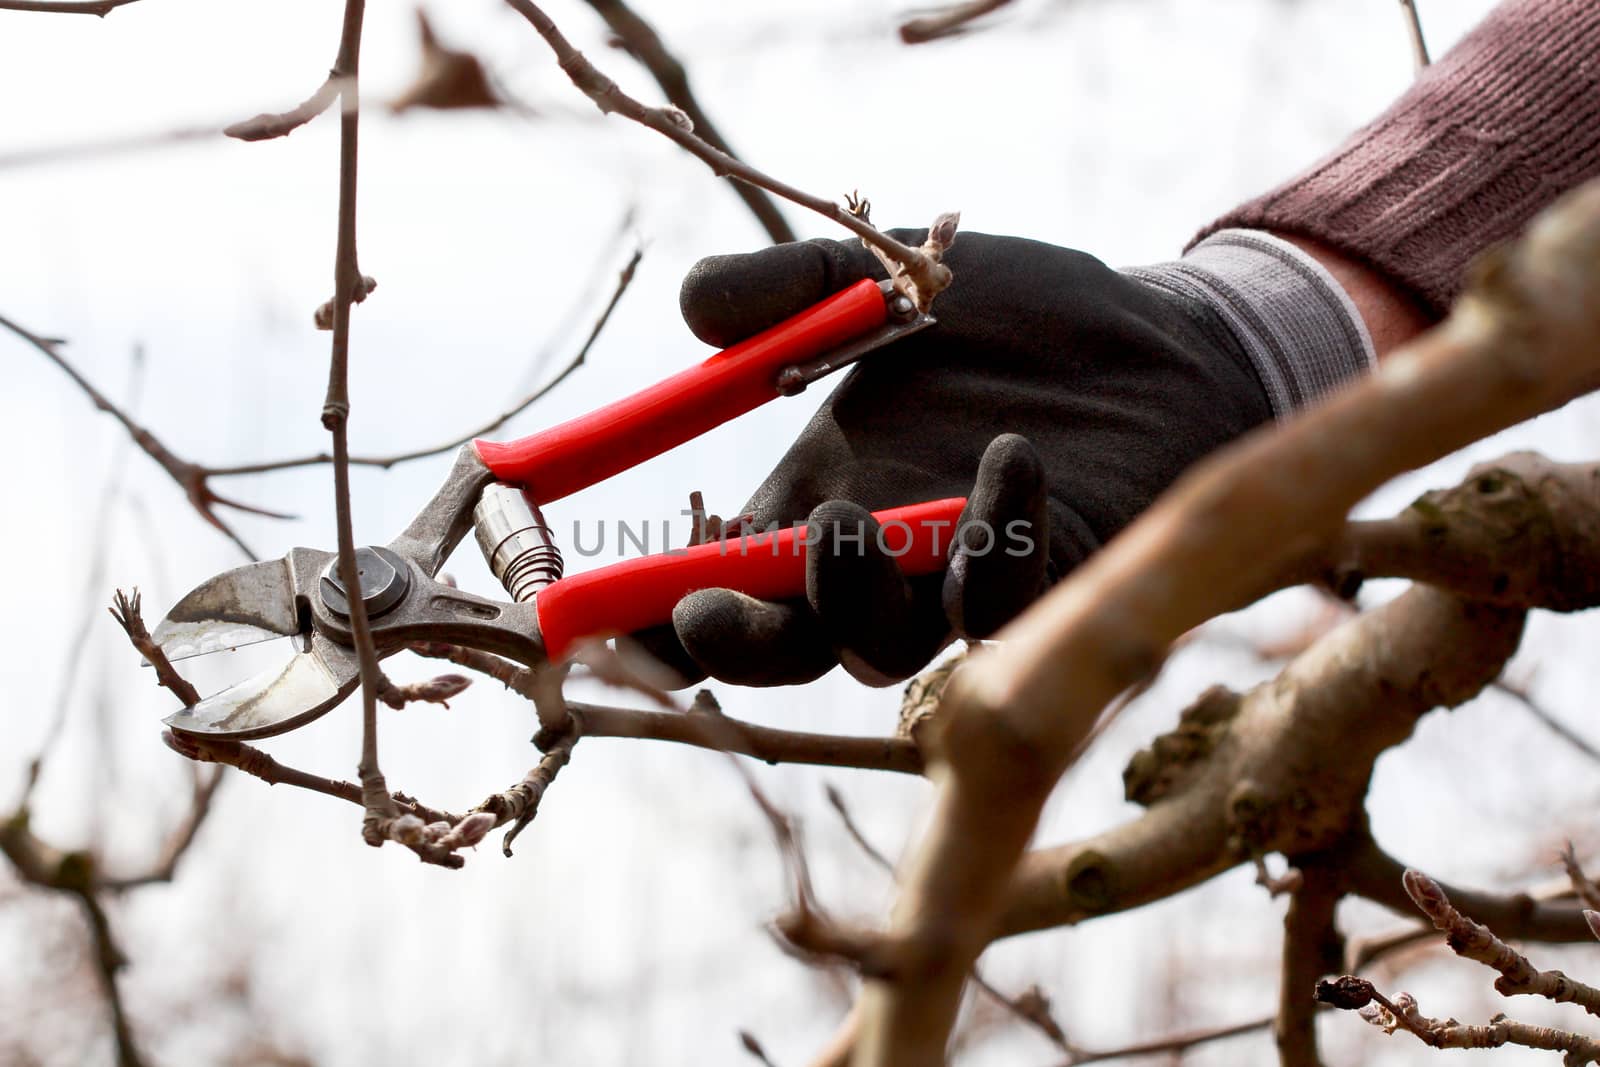 image of a Pruning apple tree in march